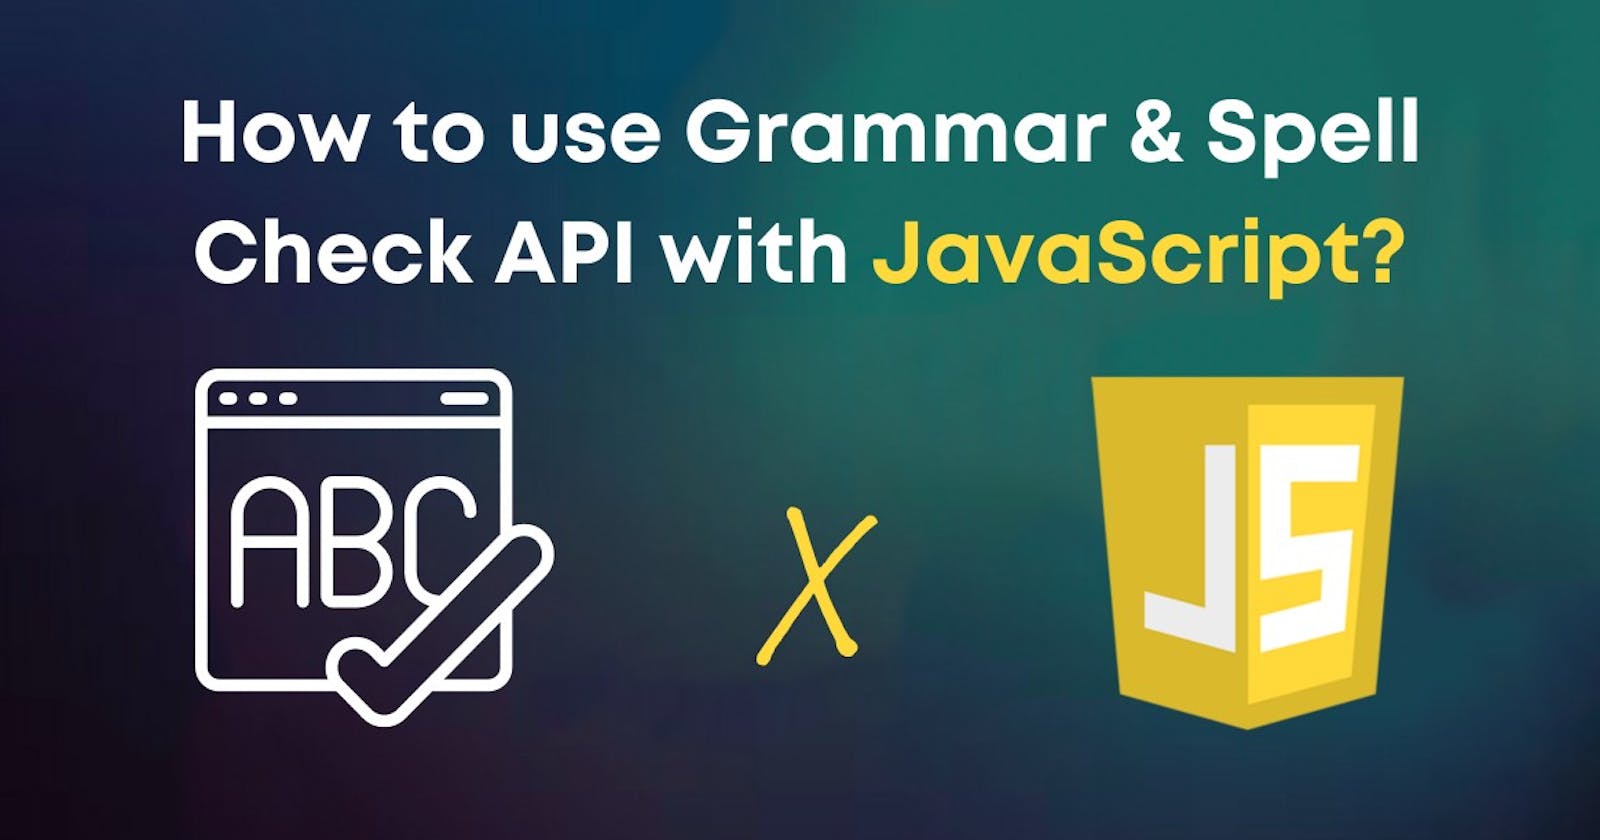 How to check grammar and spelling of your text content with JavaScript?